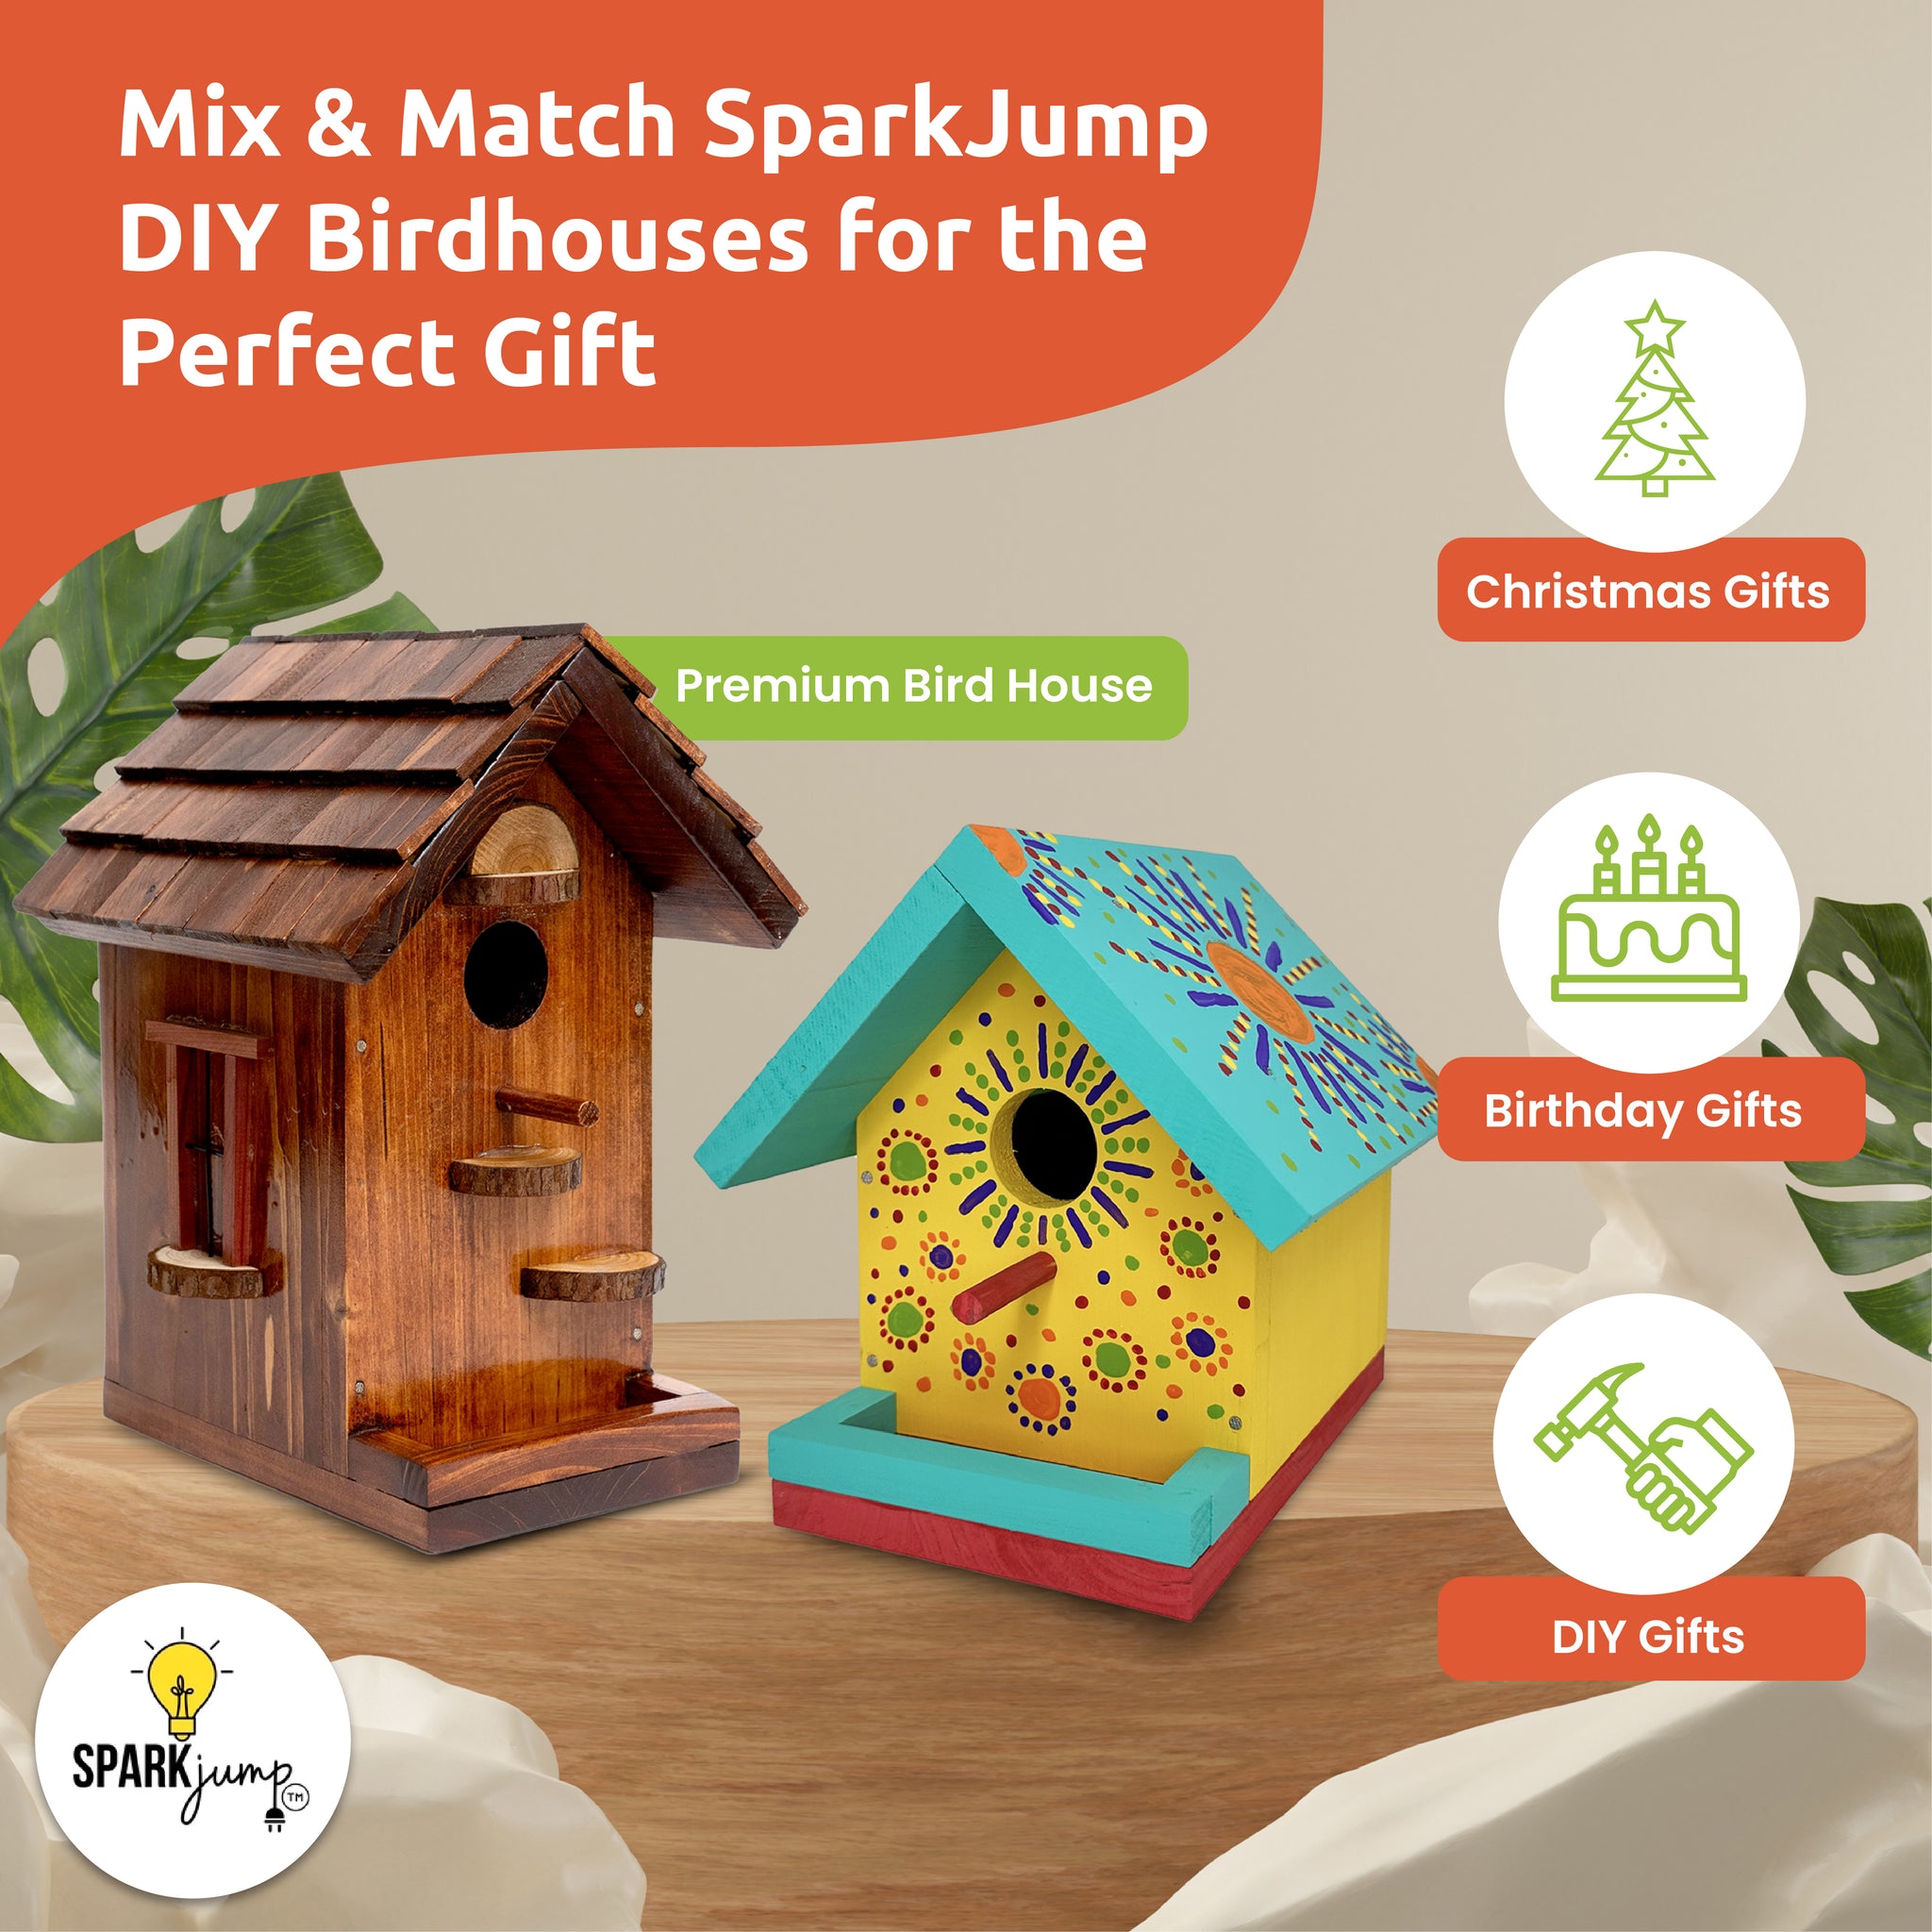 25 Unique Handmade Gift Ideas for Christmas - The Yellow Birdhouse